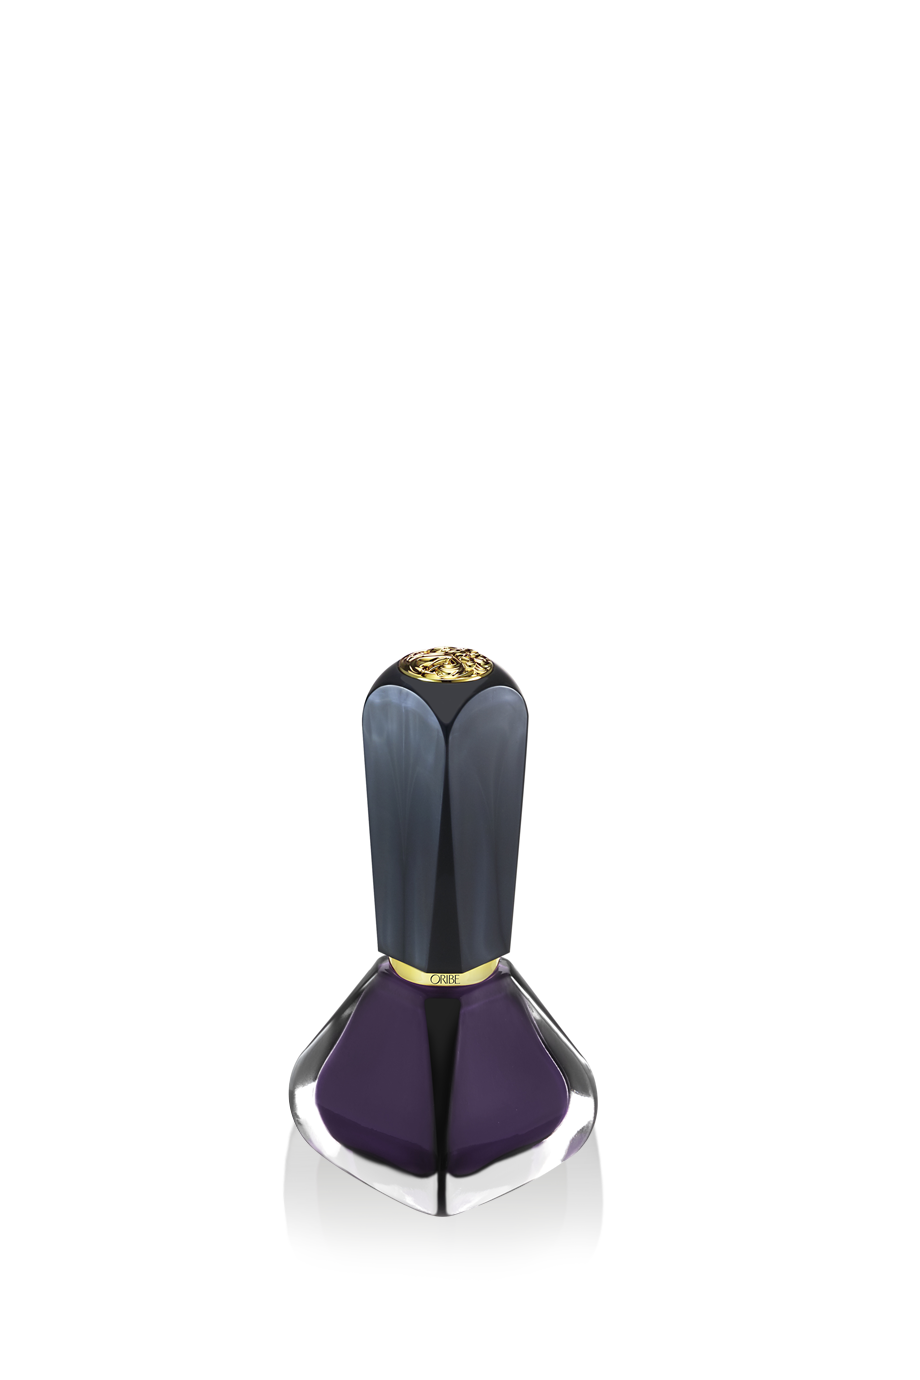 Oribe The Lacquer High Shine Nail Polish - The Violet